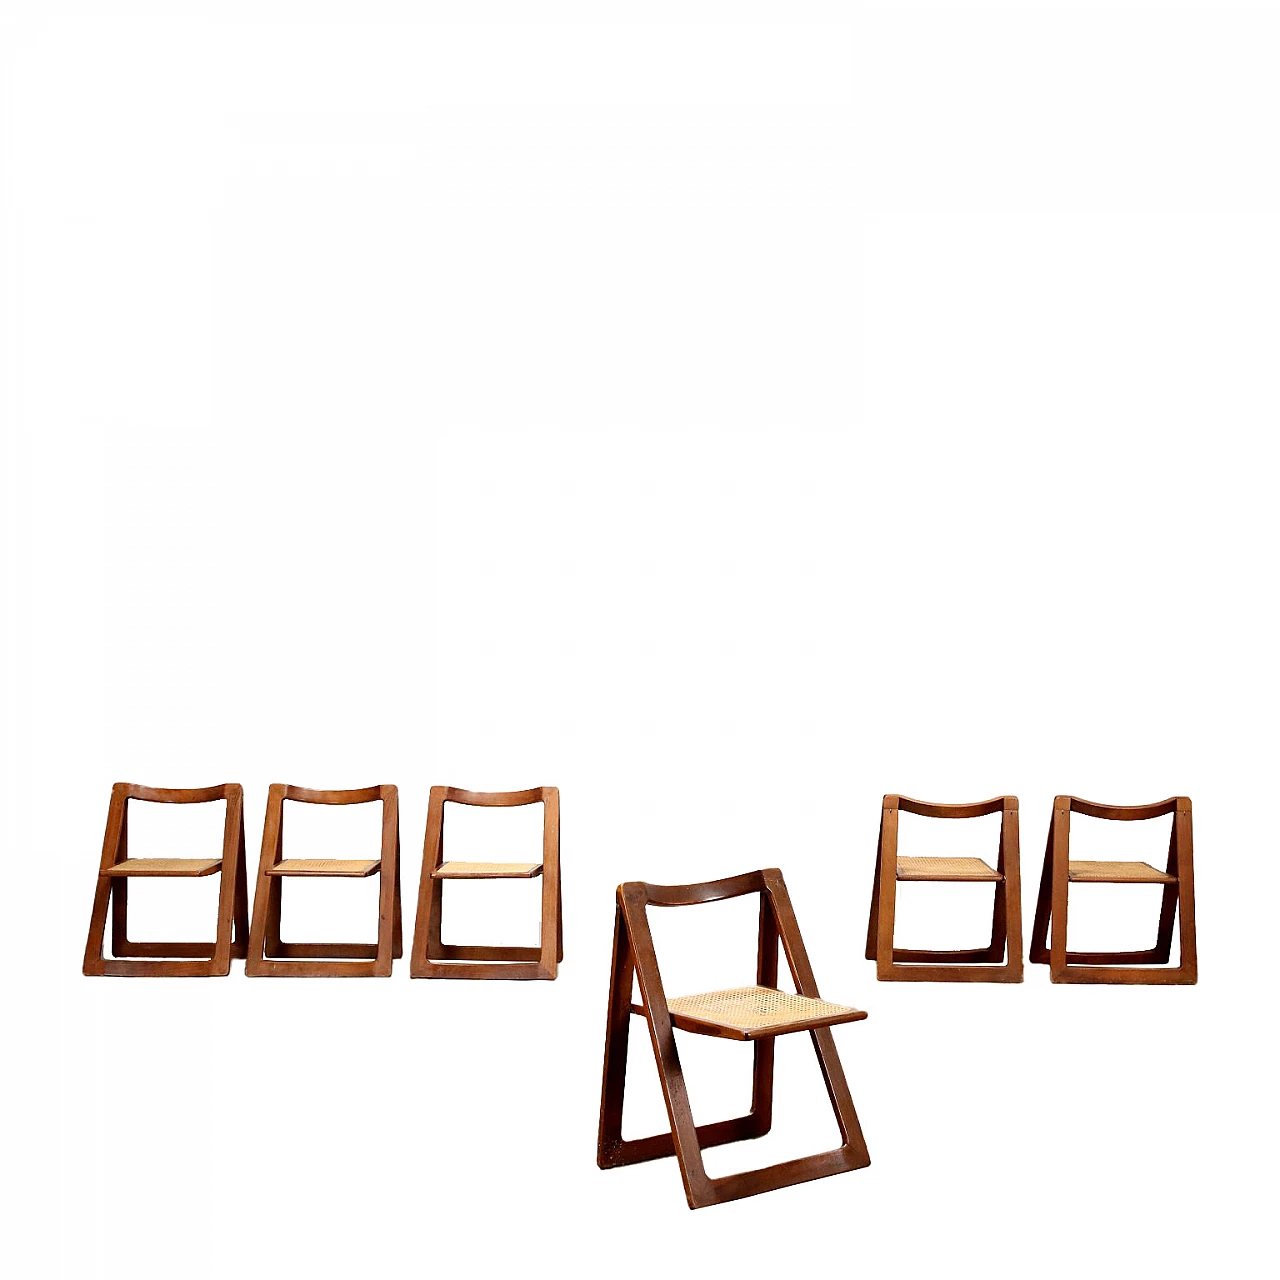 6 Trieste chairs by Aldo Jacober for Bazzani, 1960s 1